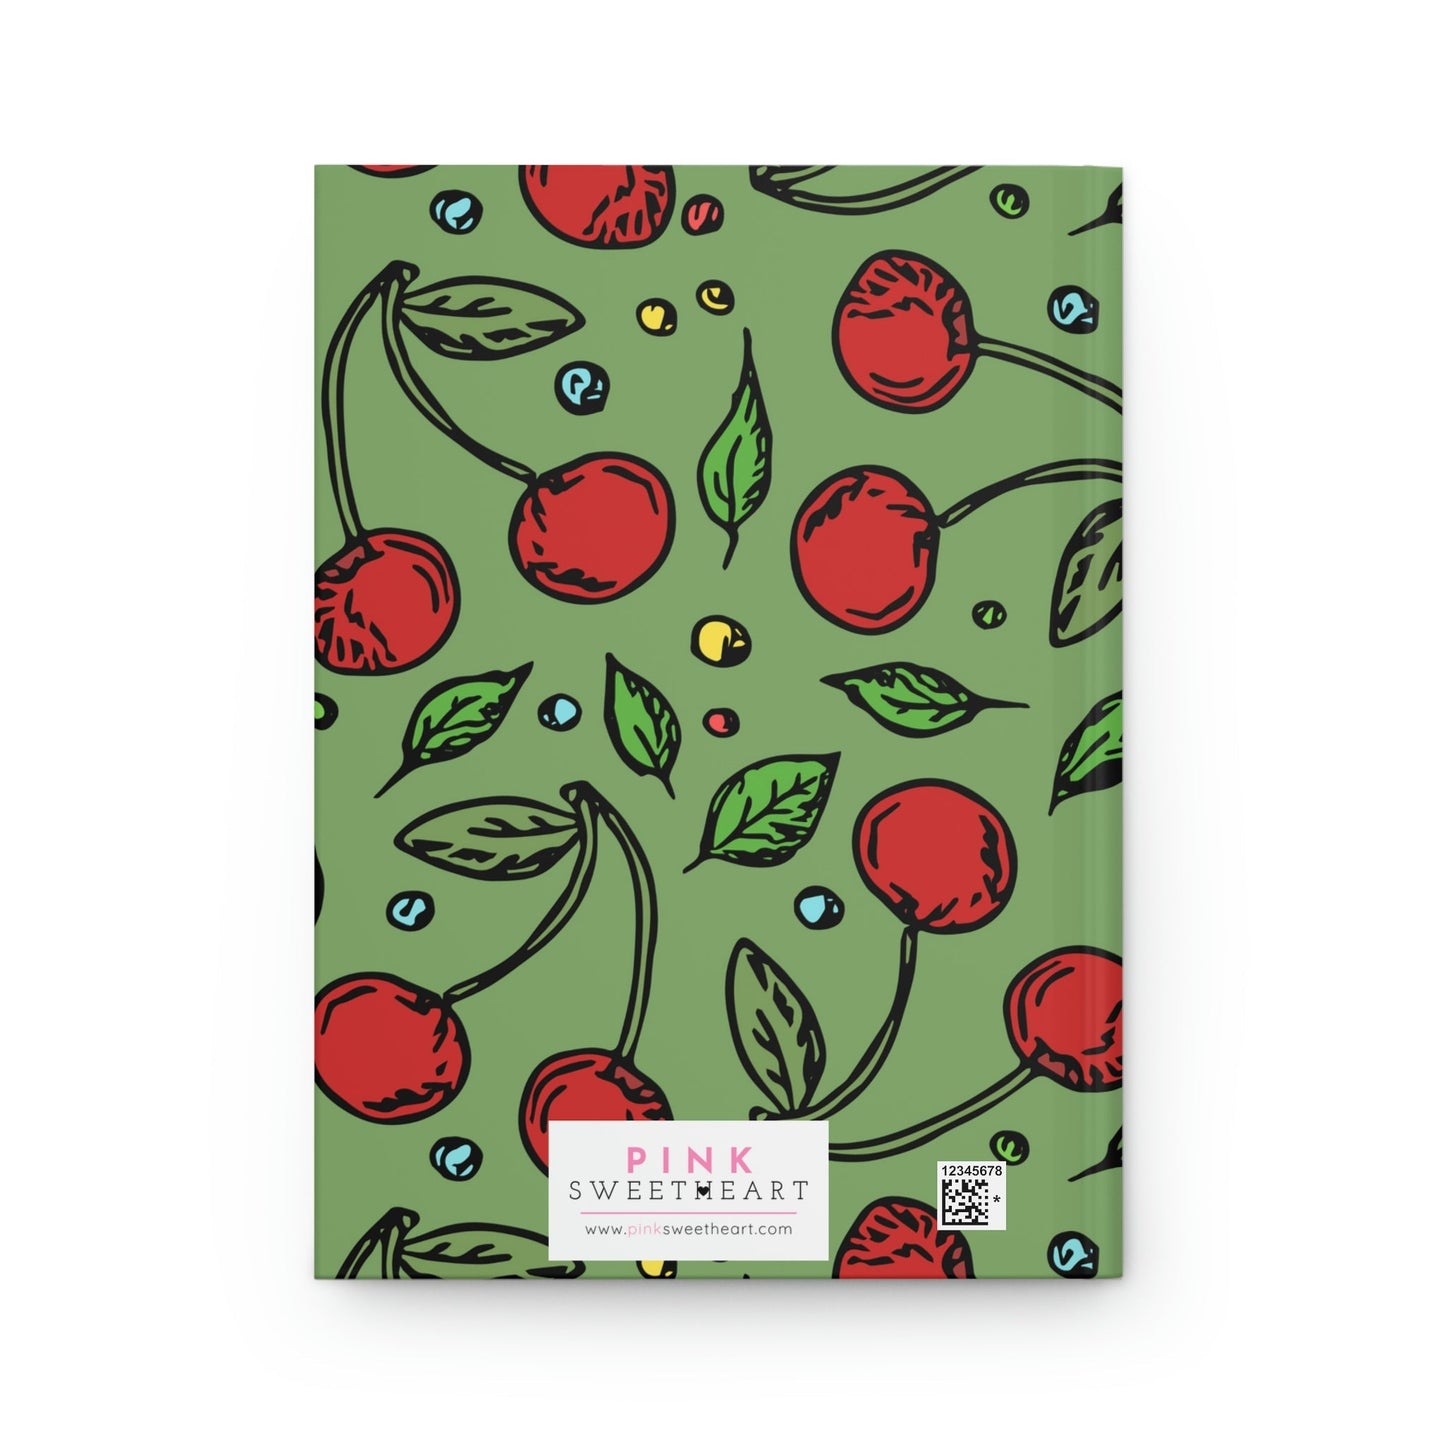 The Best Cherries Hardcover Matte Journal Paper products Pink Sweetheart